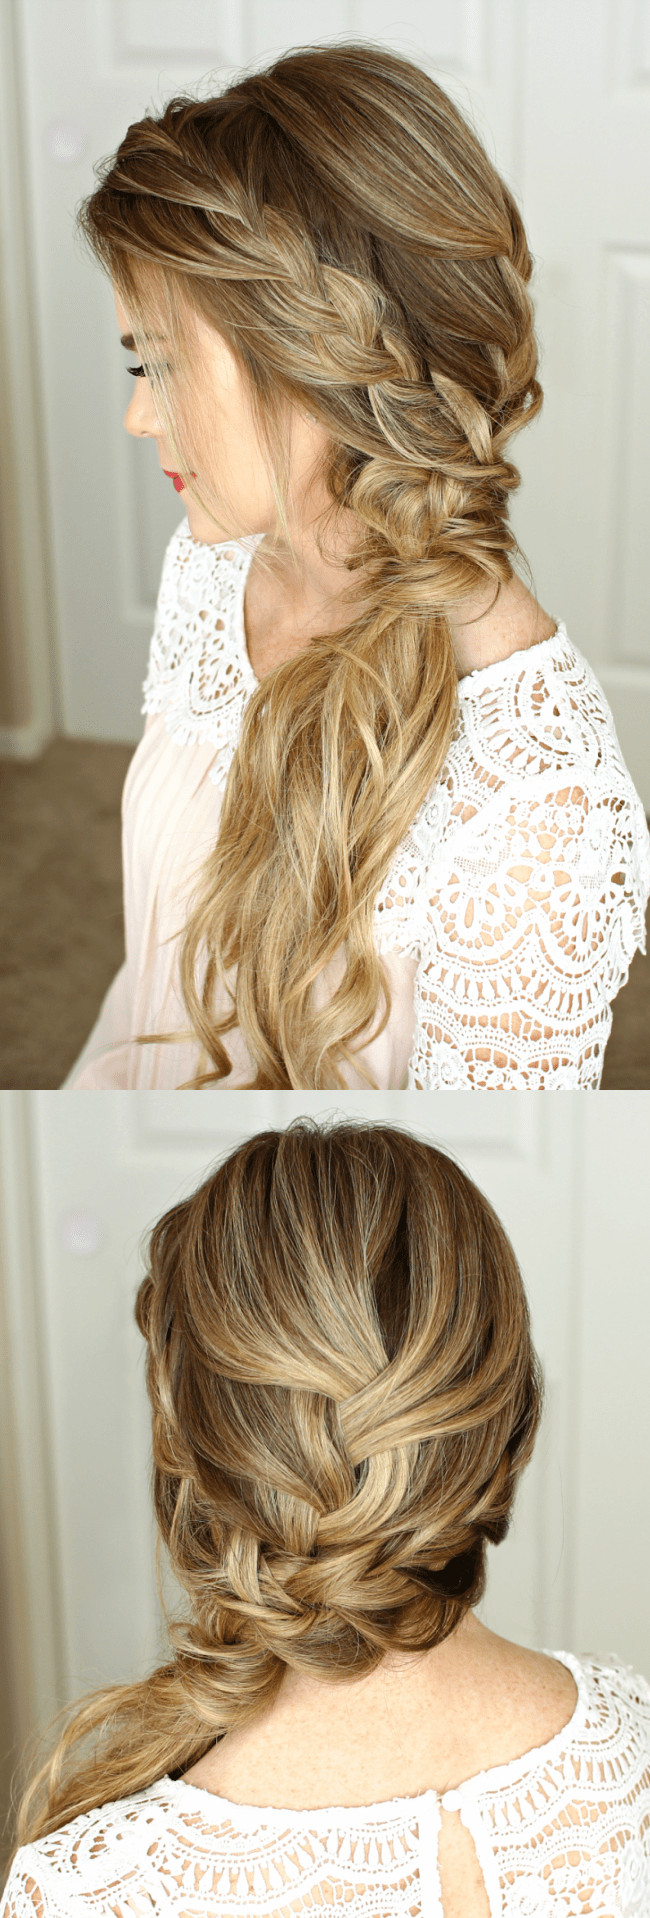 Side Swept Hairstyles For Prom
 Braided Side Swept Prom Hairstyle